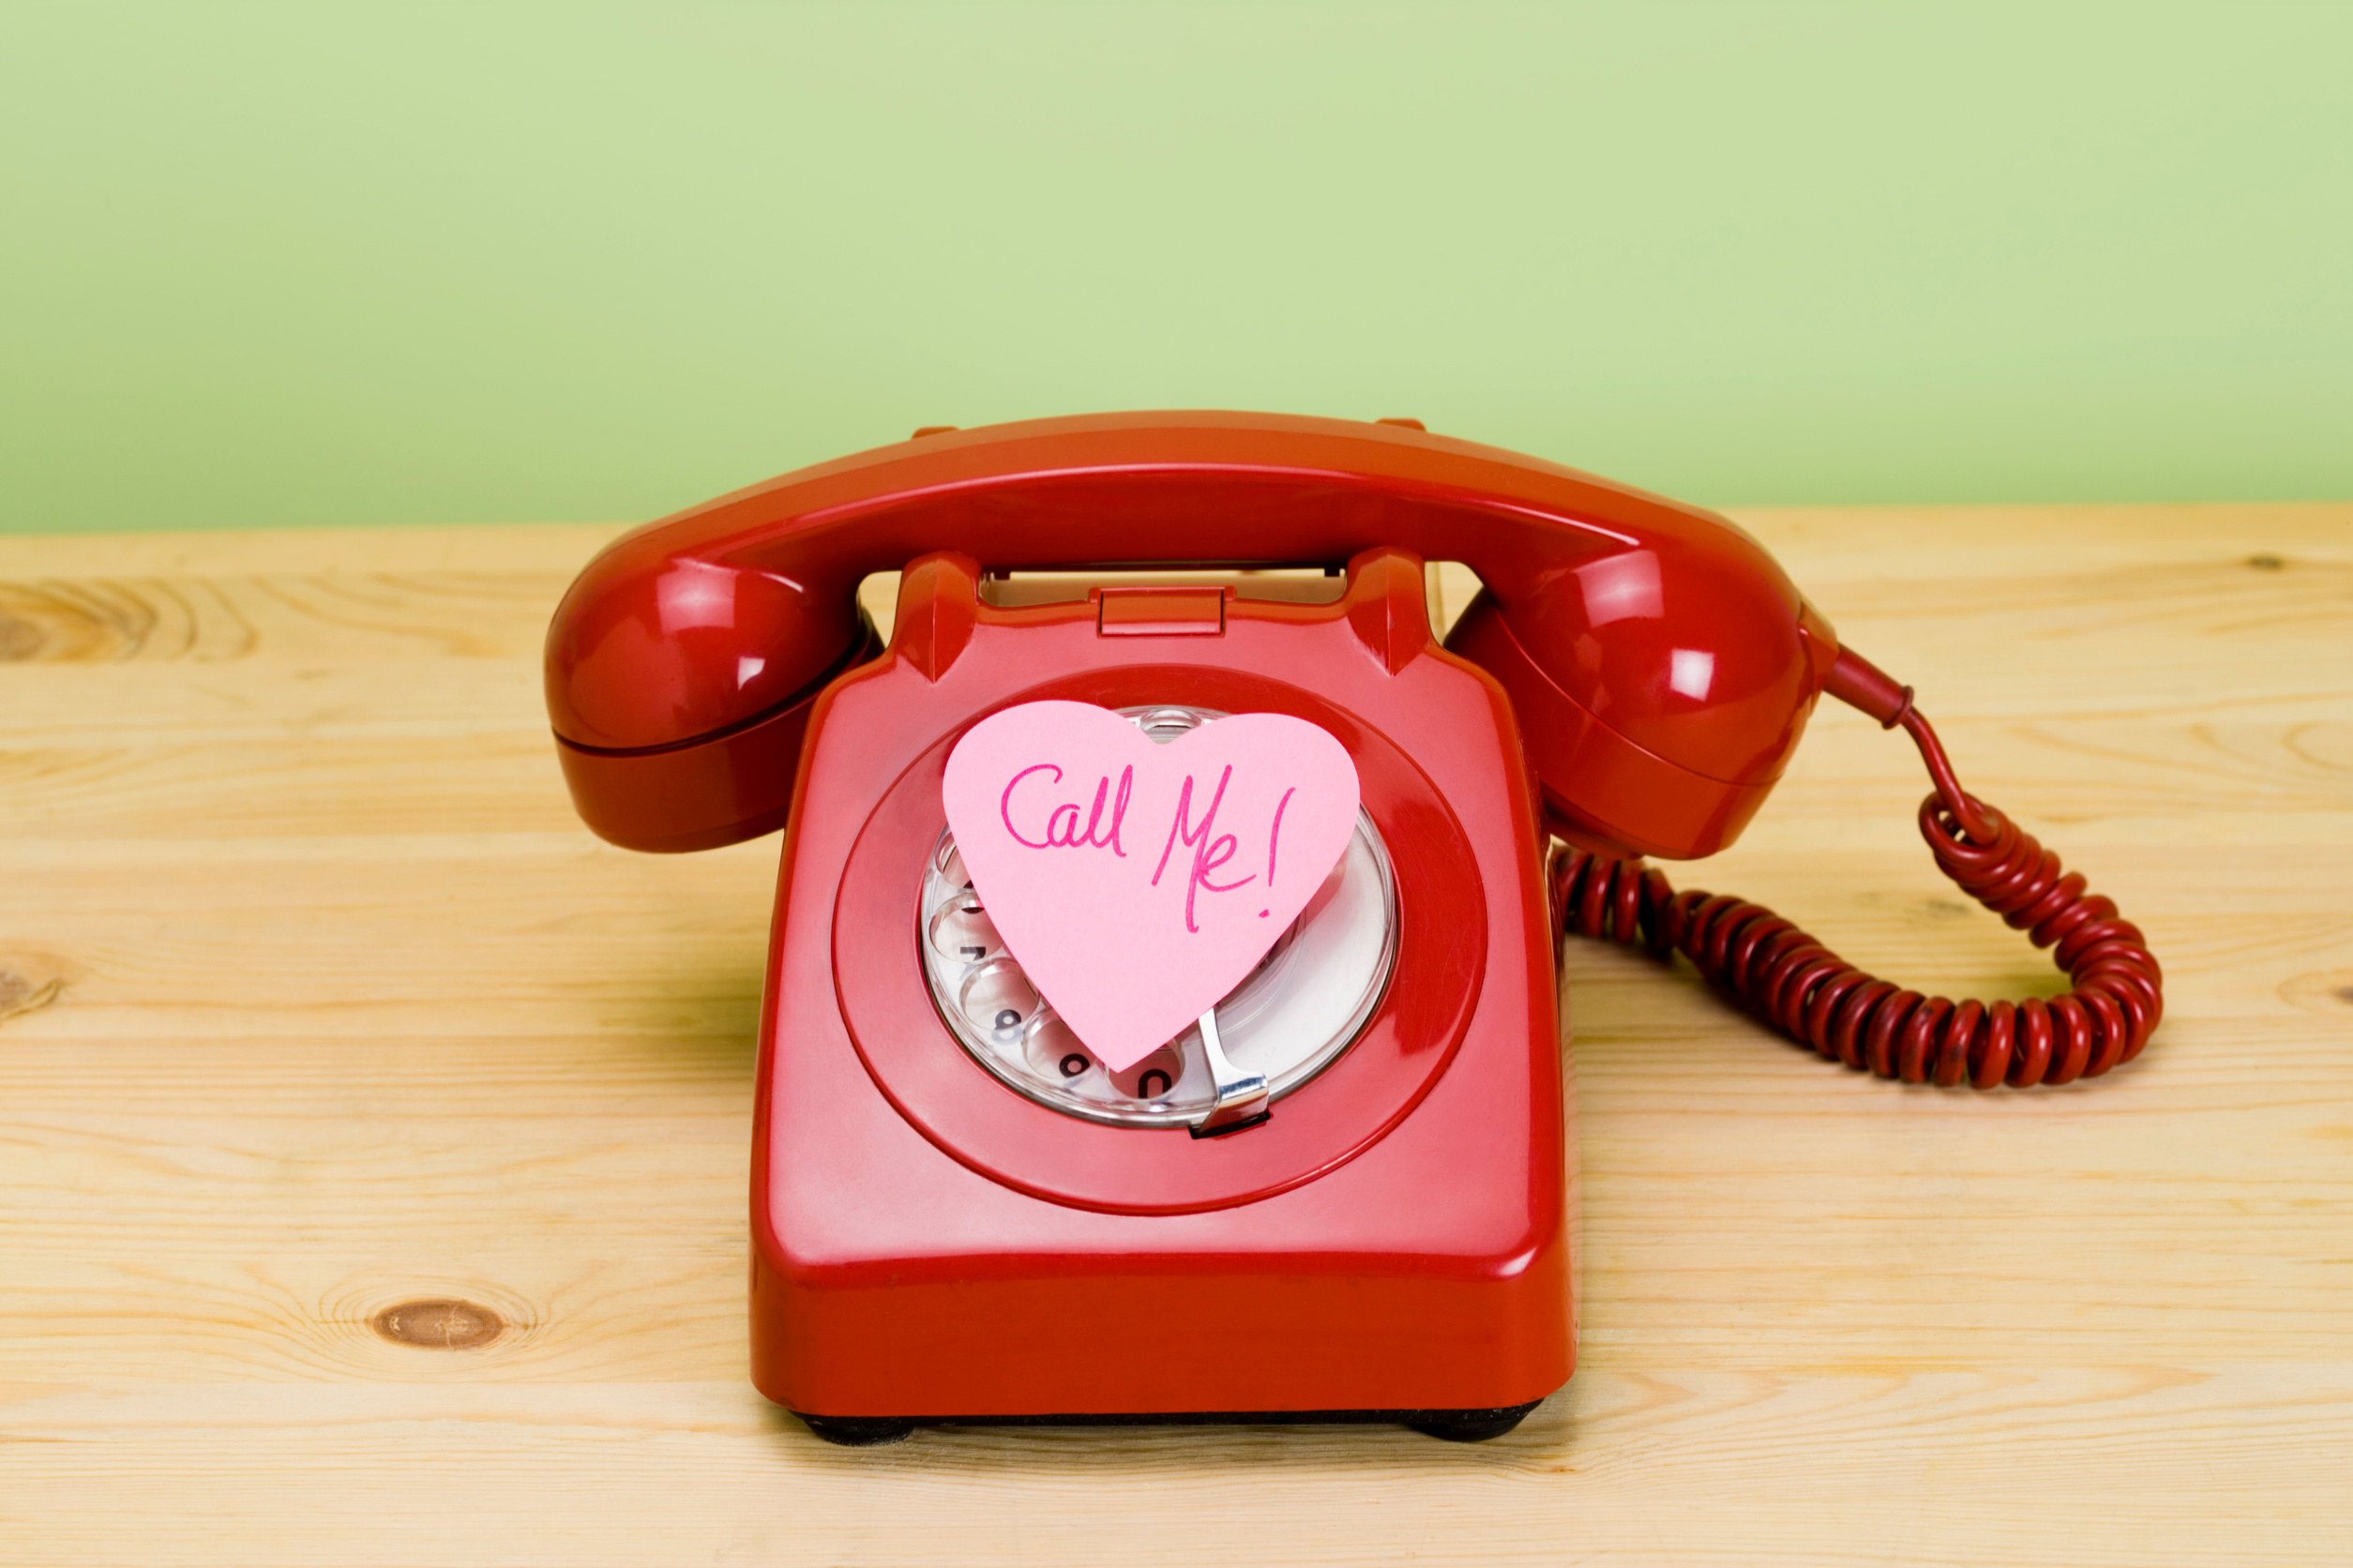 Call me on heart-shaped notepad on telephone